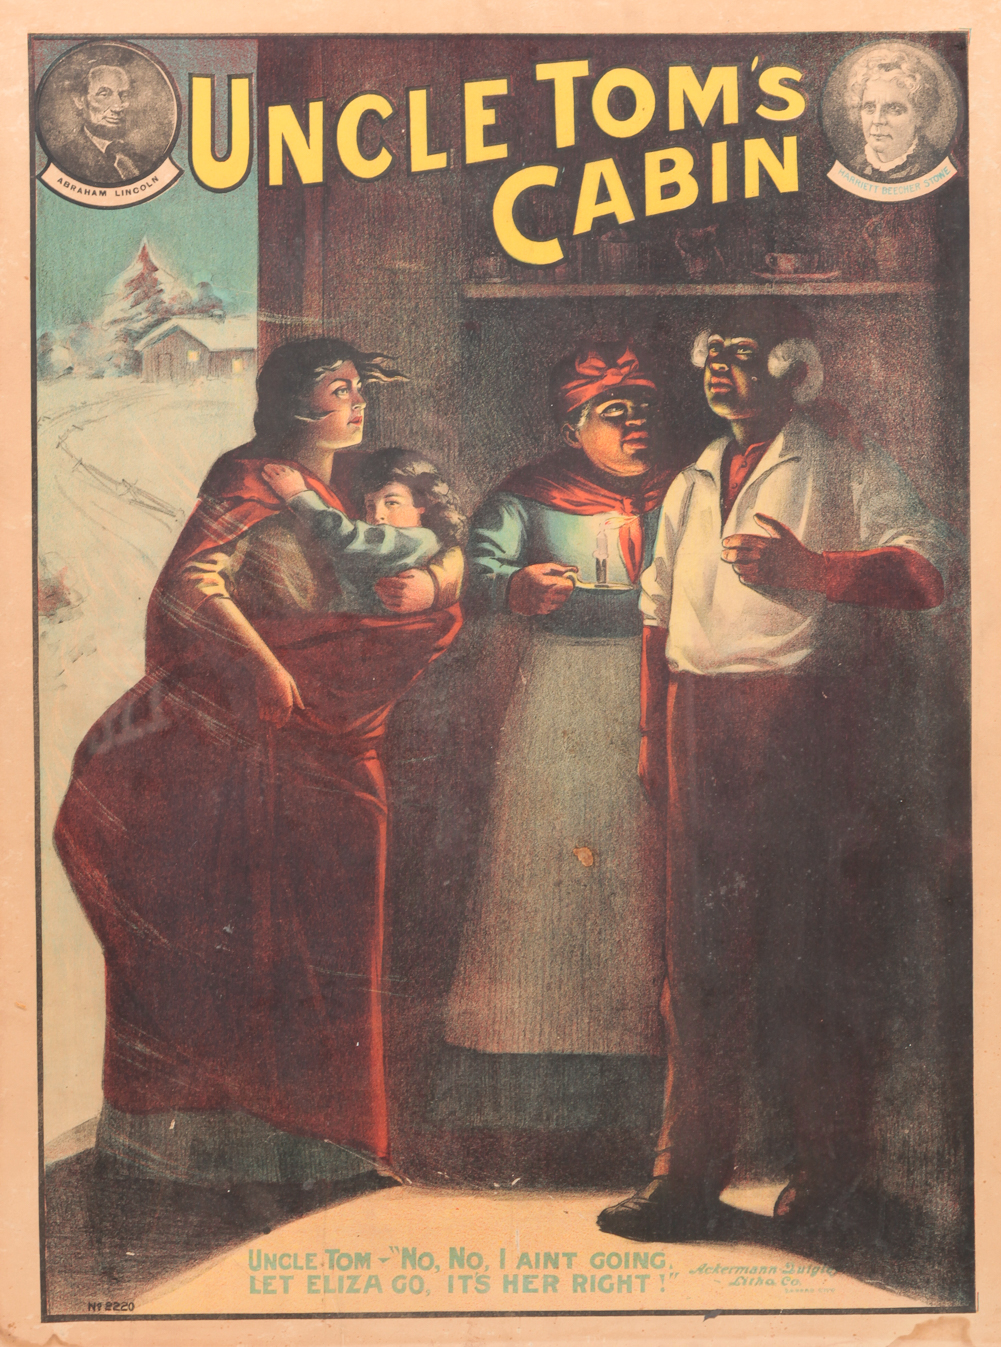 AMERICAN "UNCLE TOM'S CABIN" POSTER.